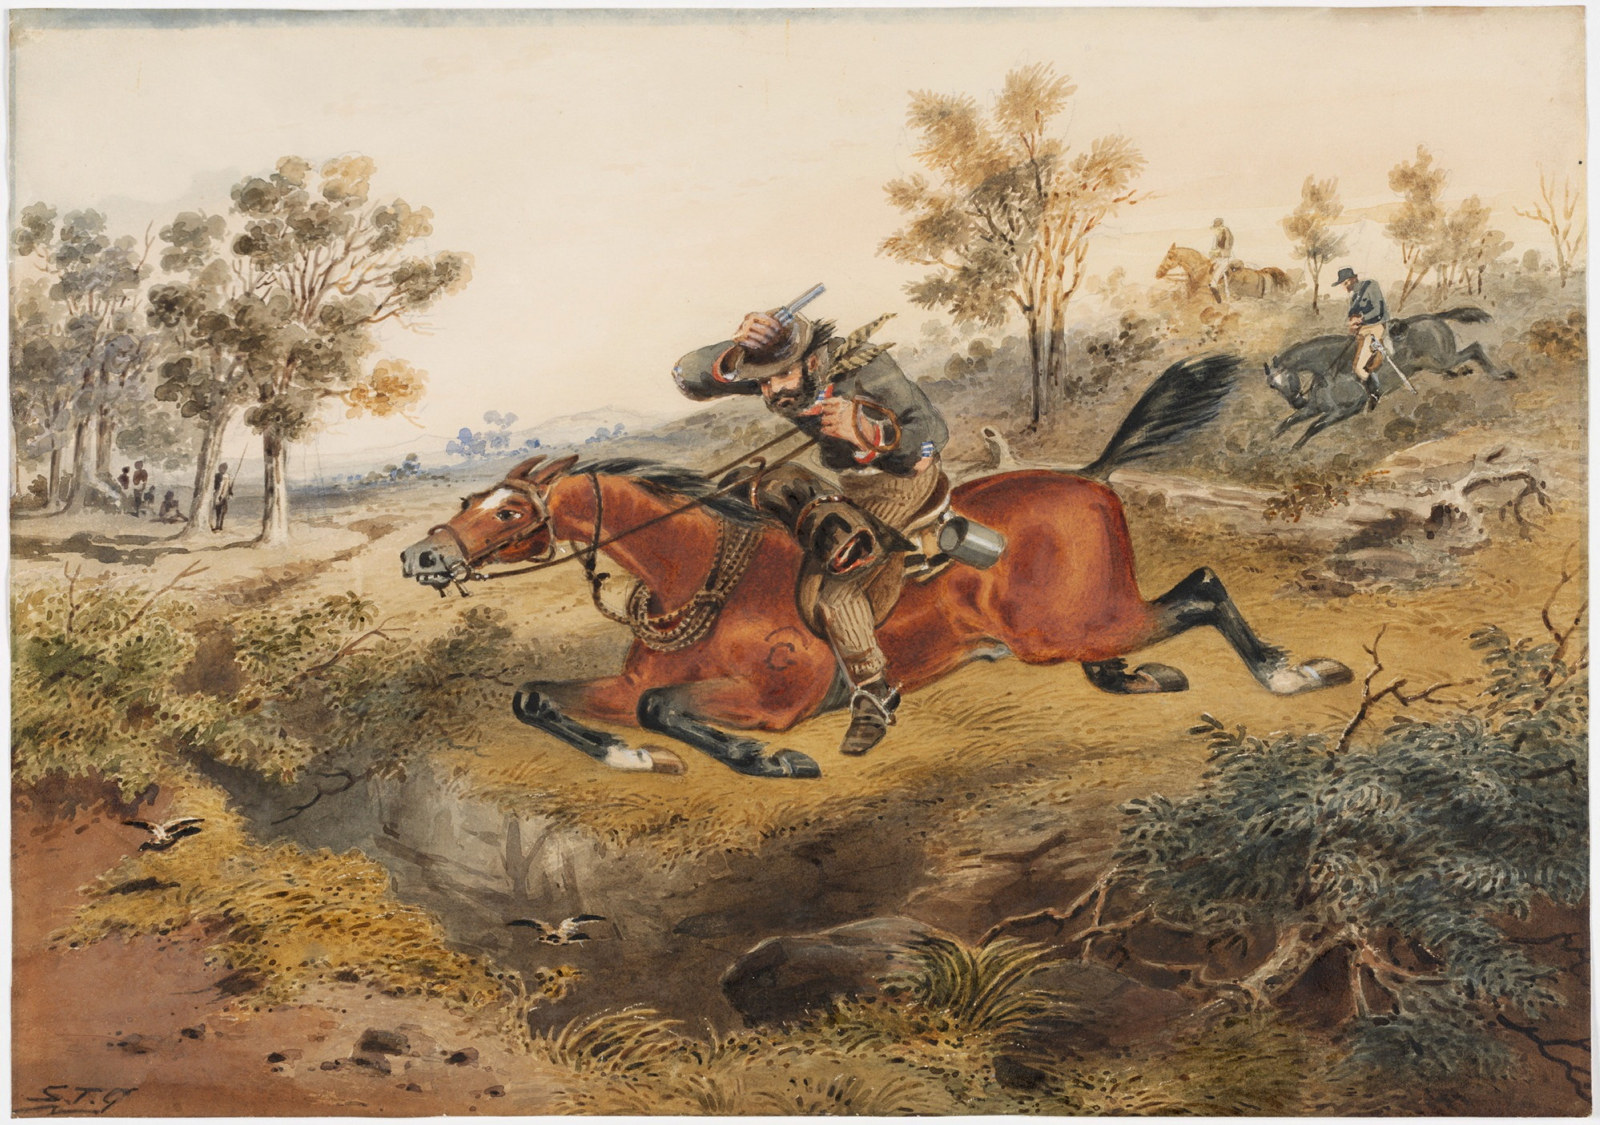 Bushranger being chased by mounted police trooper through the bush